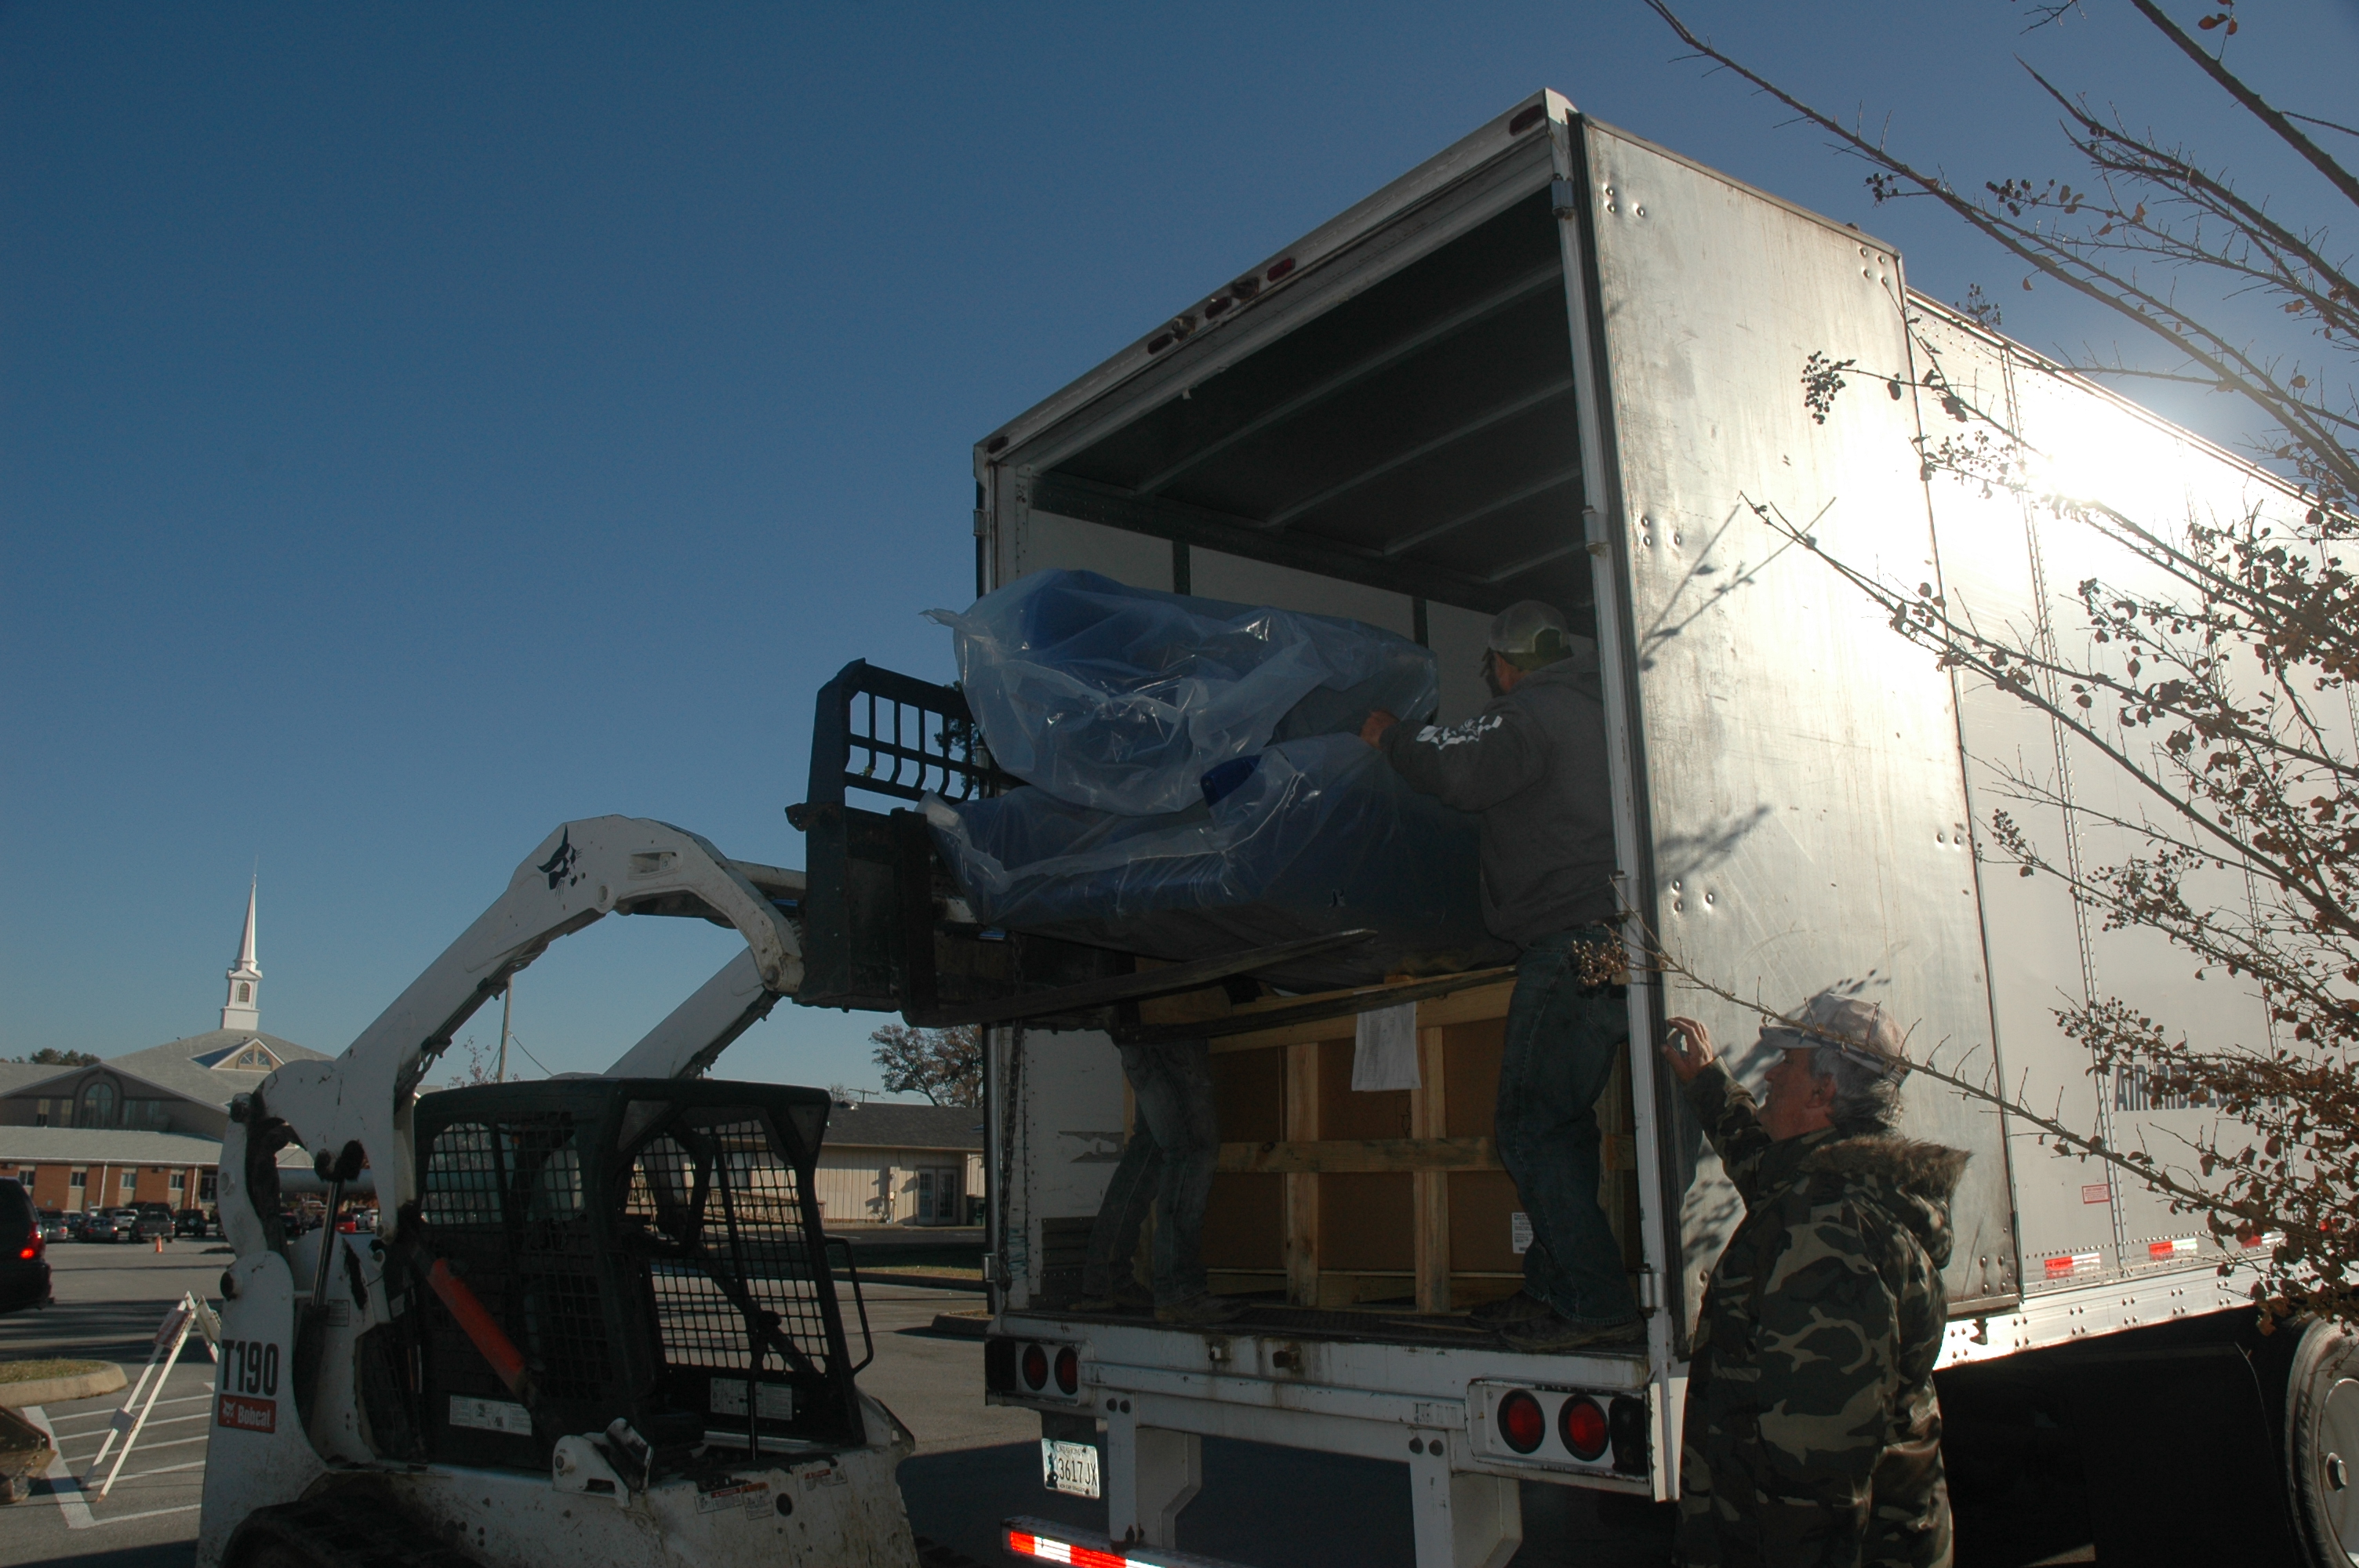 A Bobcat vehicle lowering playground equipment out of the back of a large truck as a man watches